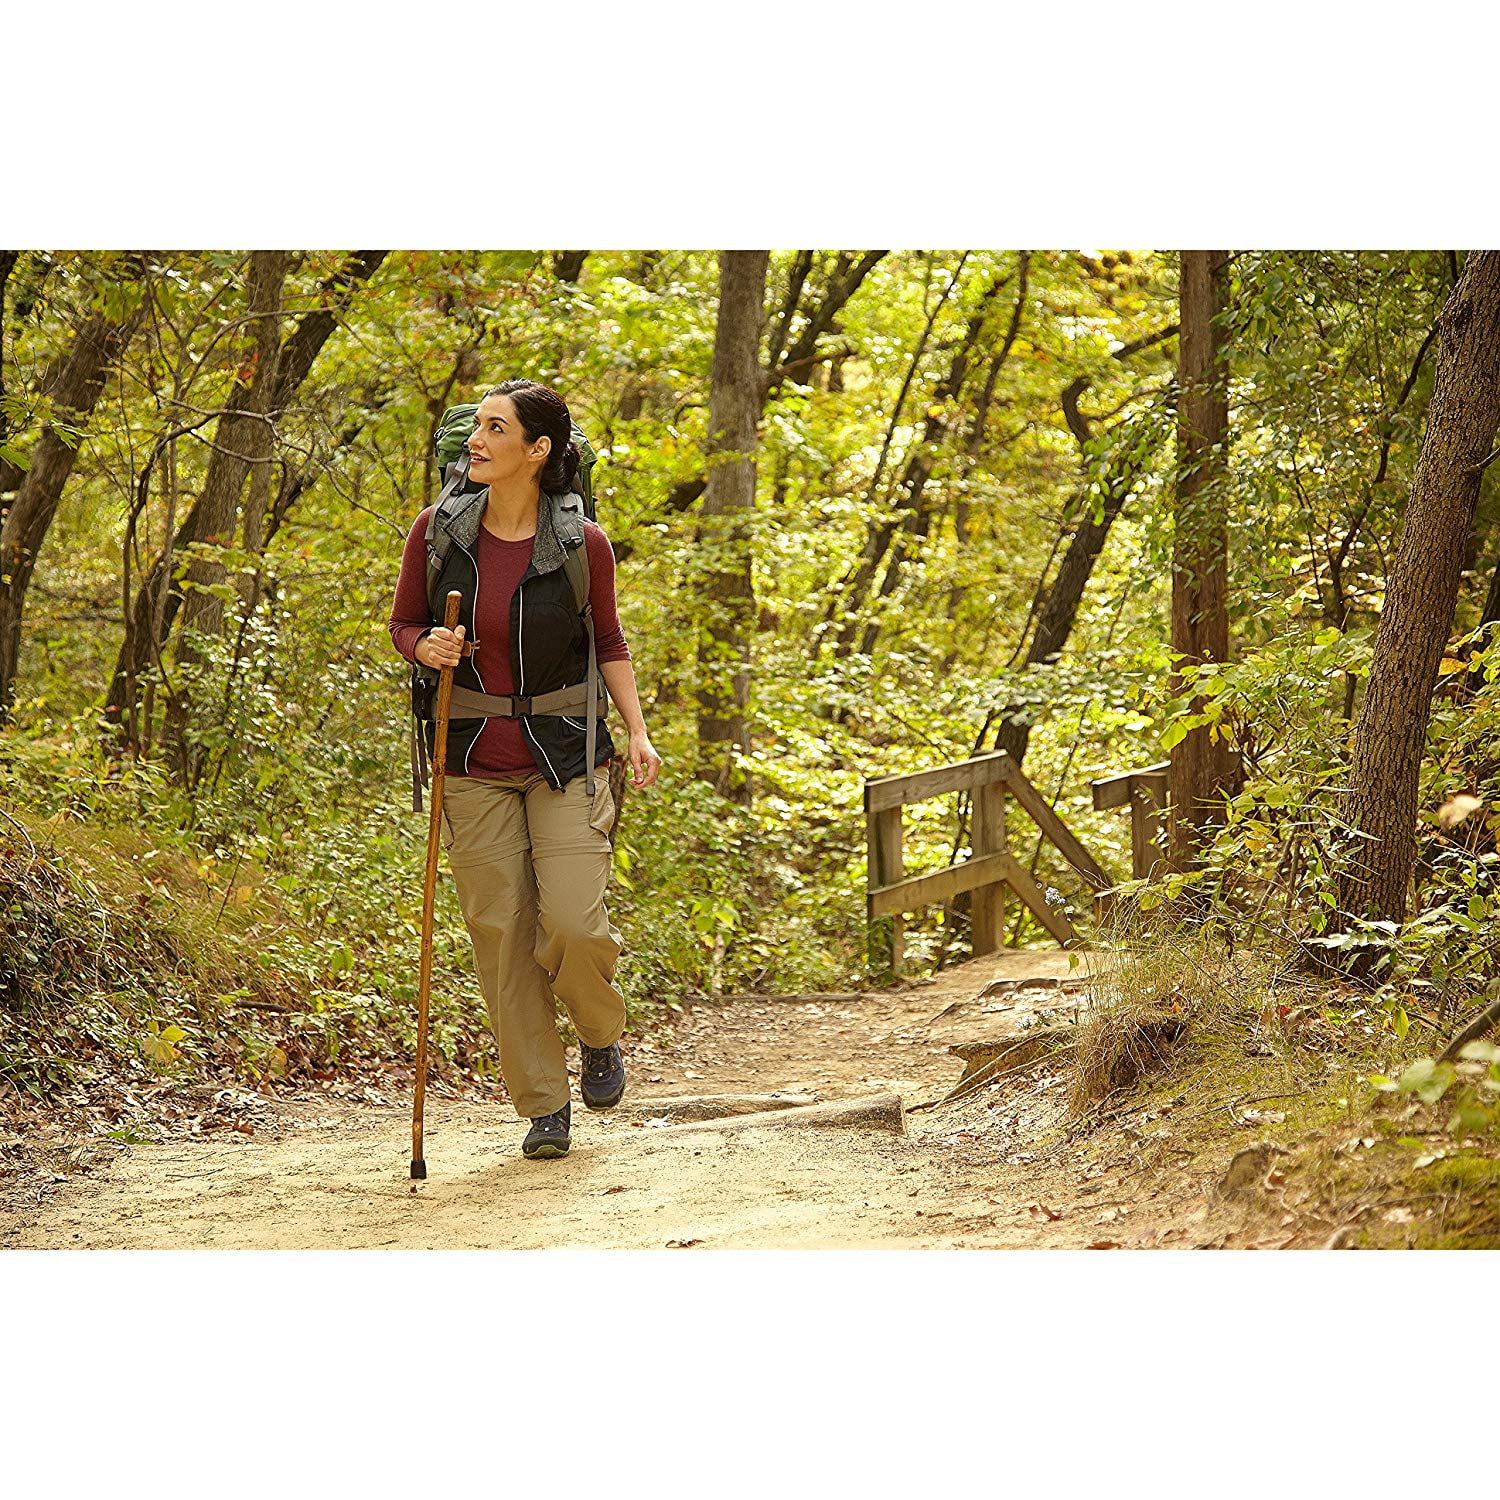 Details about   Portable Carrying Bag for Walking Stick Trekking Hiking Poles Tent Pole Backpack 